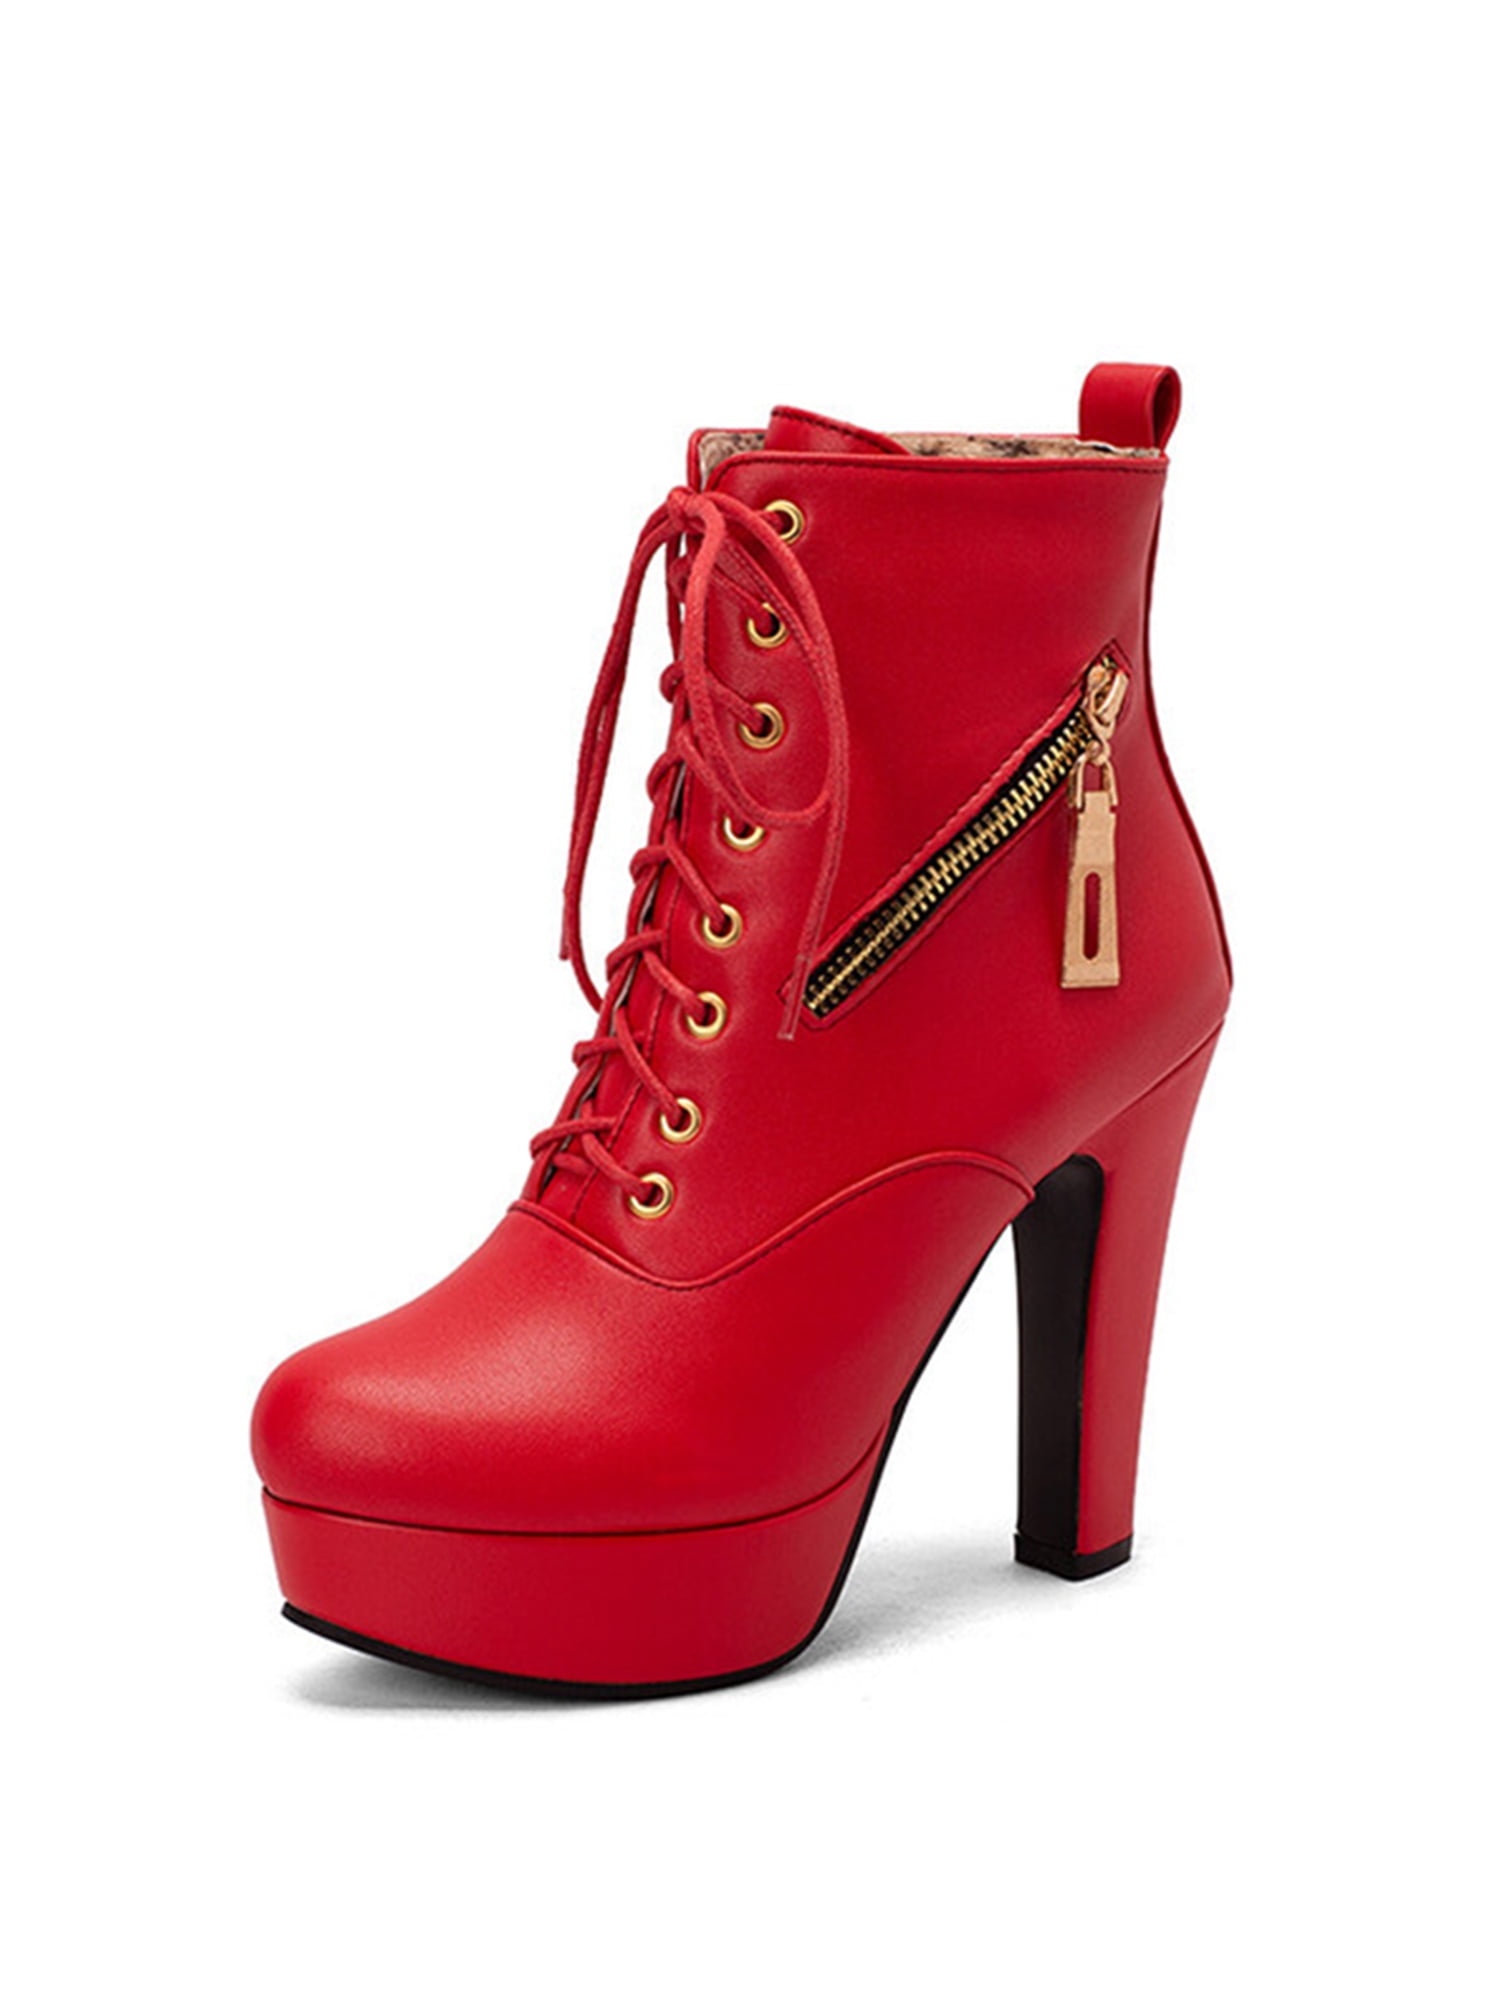 Women's ankle boots: flat, heeled & more fashion booties for ladies | YOOX-hkpdtq2012.edu.vn